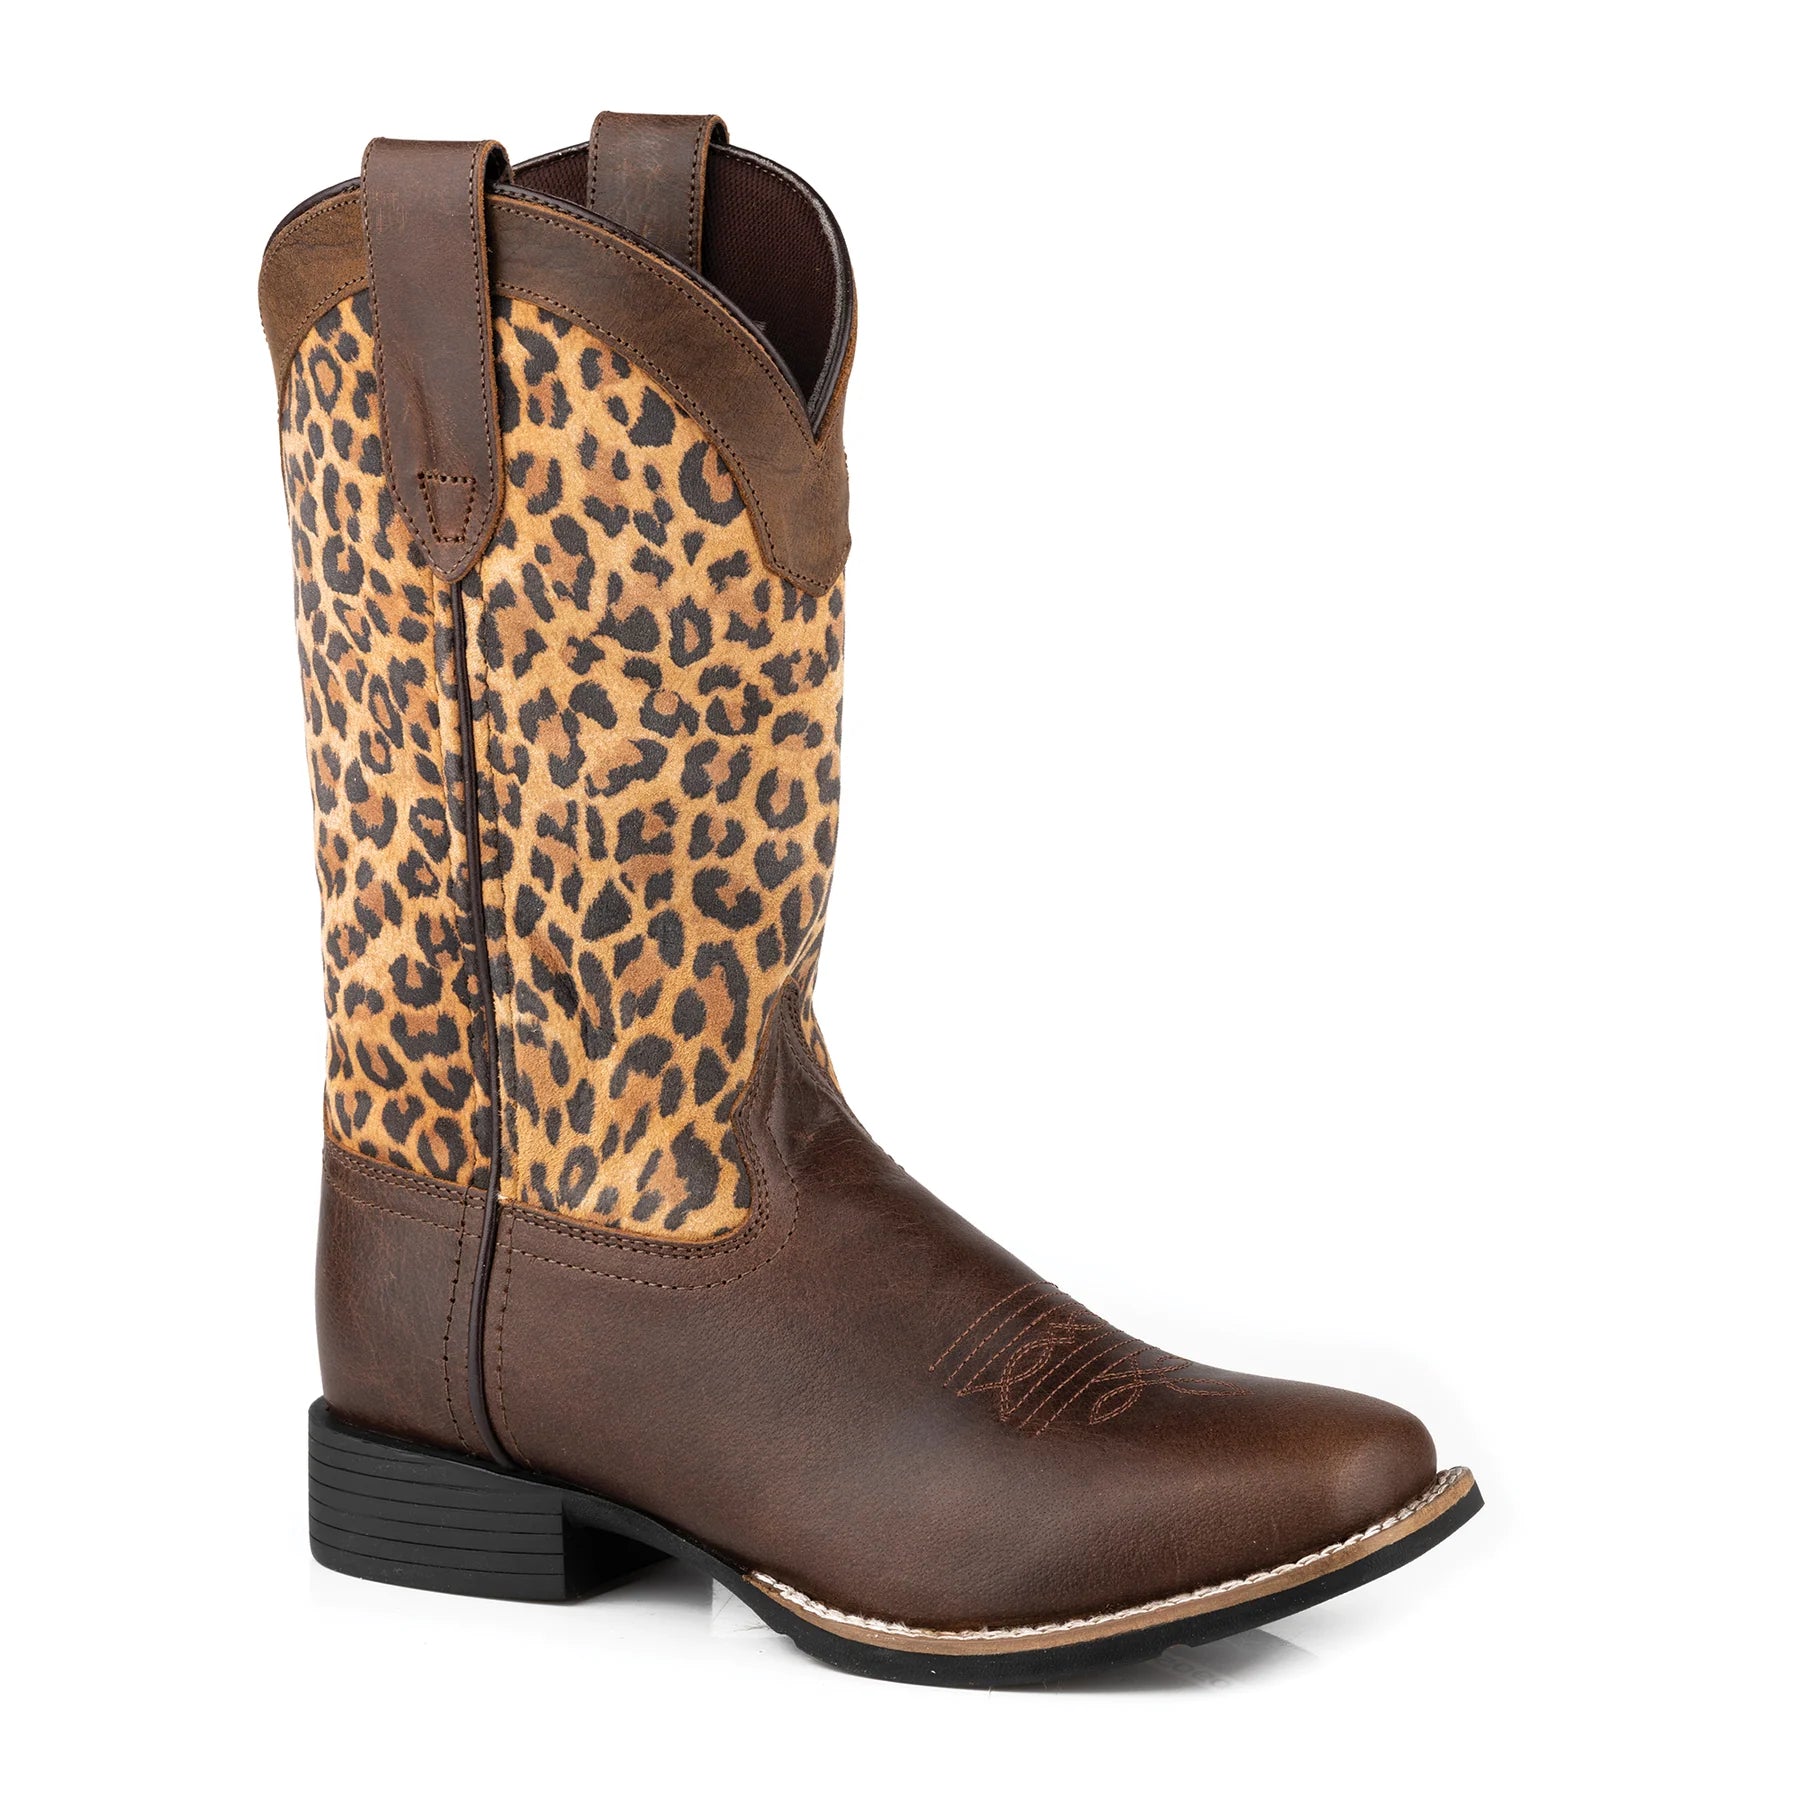 Roper Wms Monterey Leopard Brown Leather/Suede Leopard Print - Mothers Day Sale